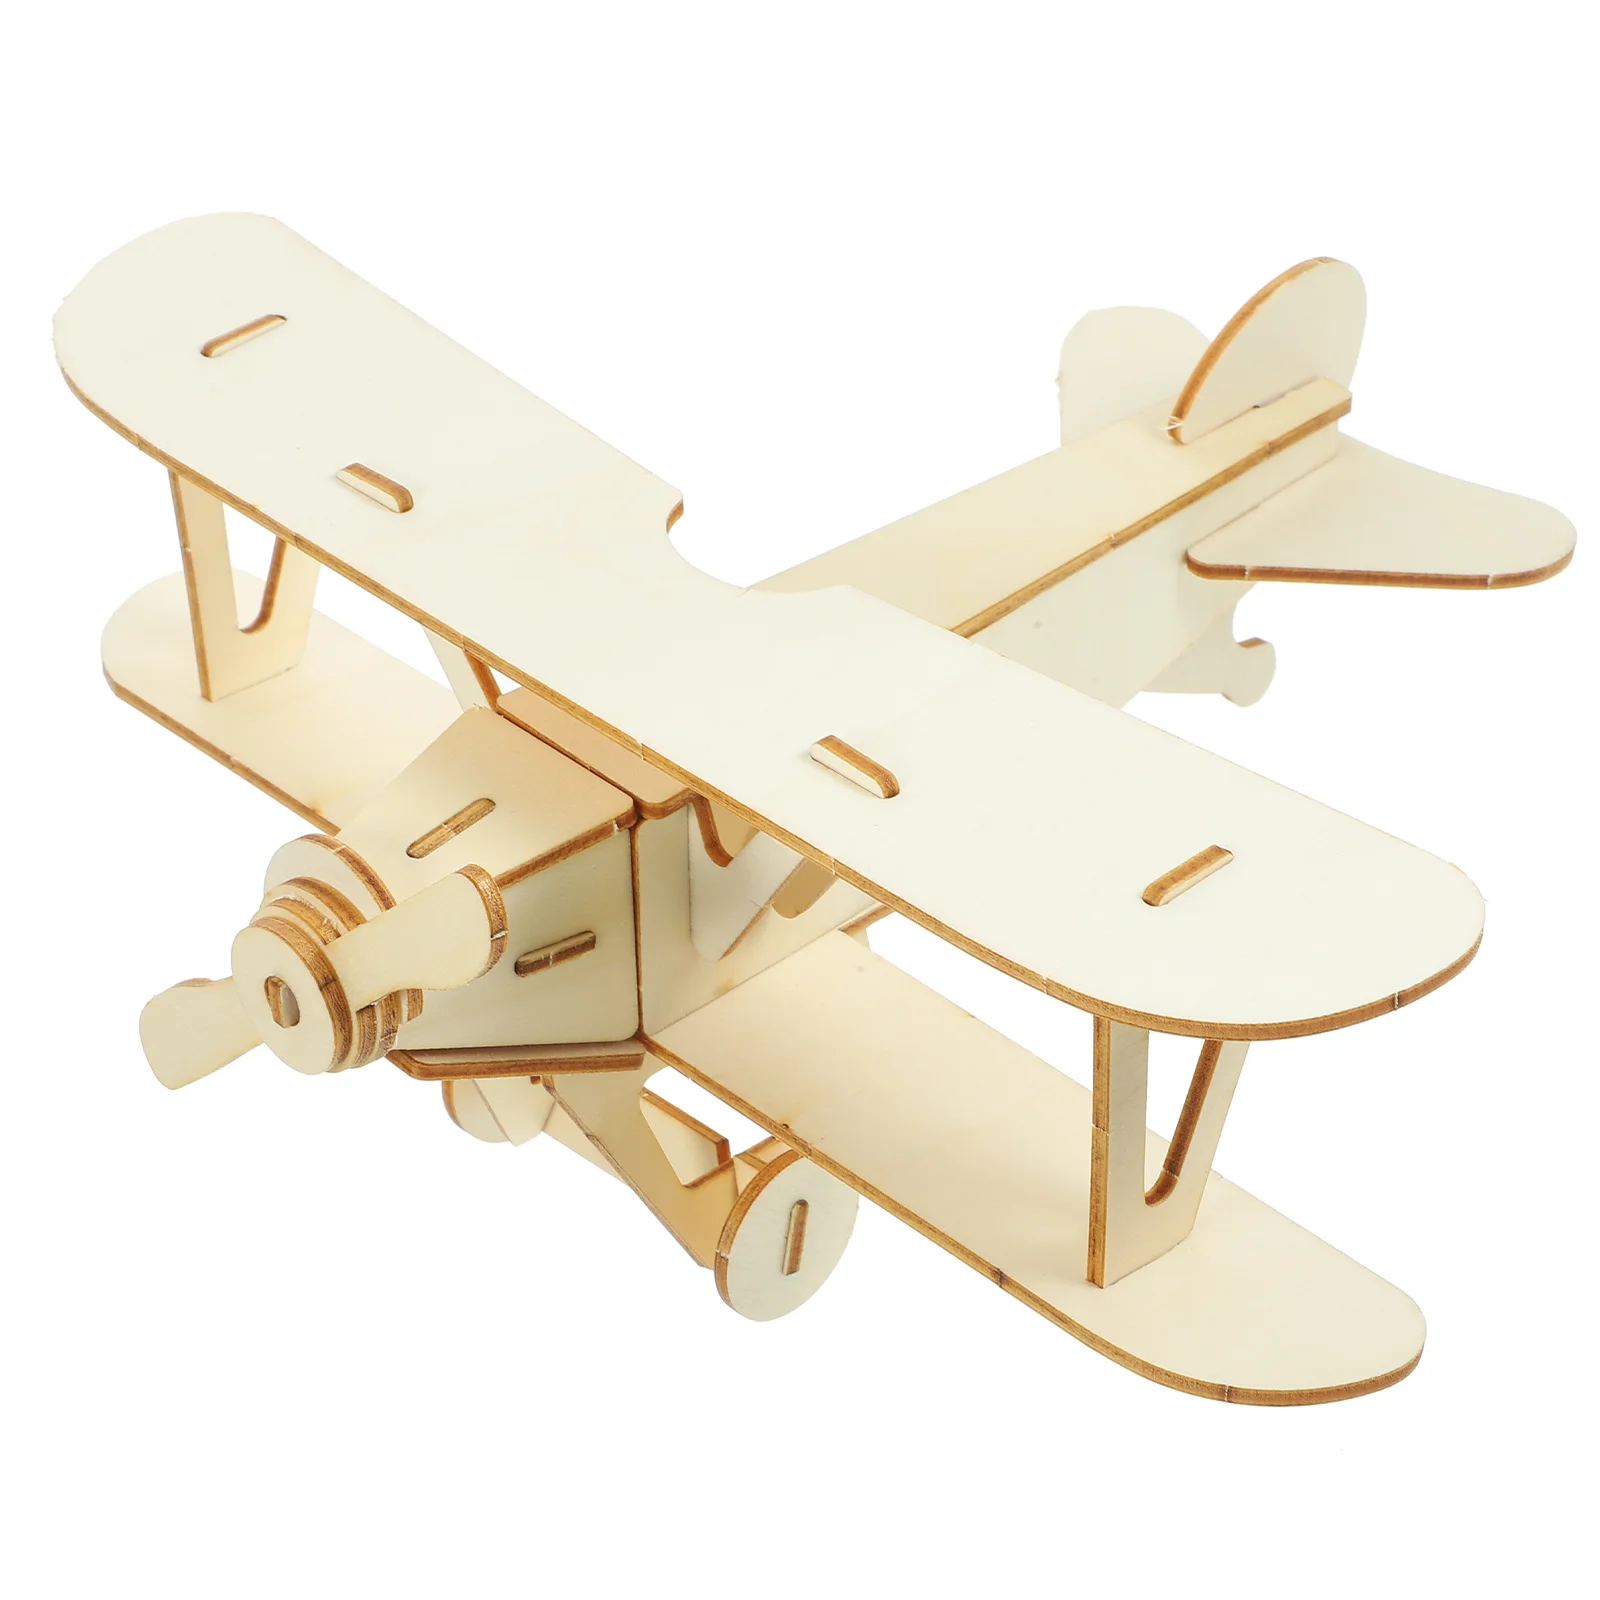 DIY Wood Toddler Foam Airplanes For Kidss Model AirToddler Foam Airplanes For Kids Wood Toddler Foam Airplanes For Kidss DIY airplane rubber bandpowered glider s airplanes model plane kits aircraft kids planesfor kit wood helicopter